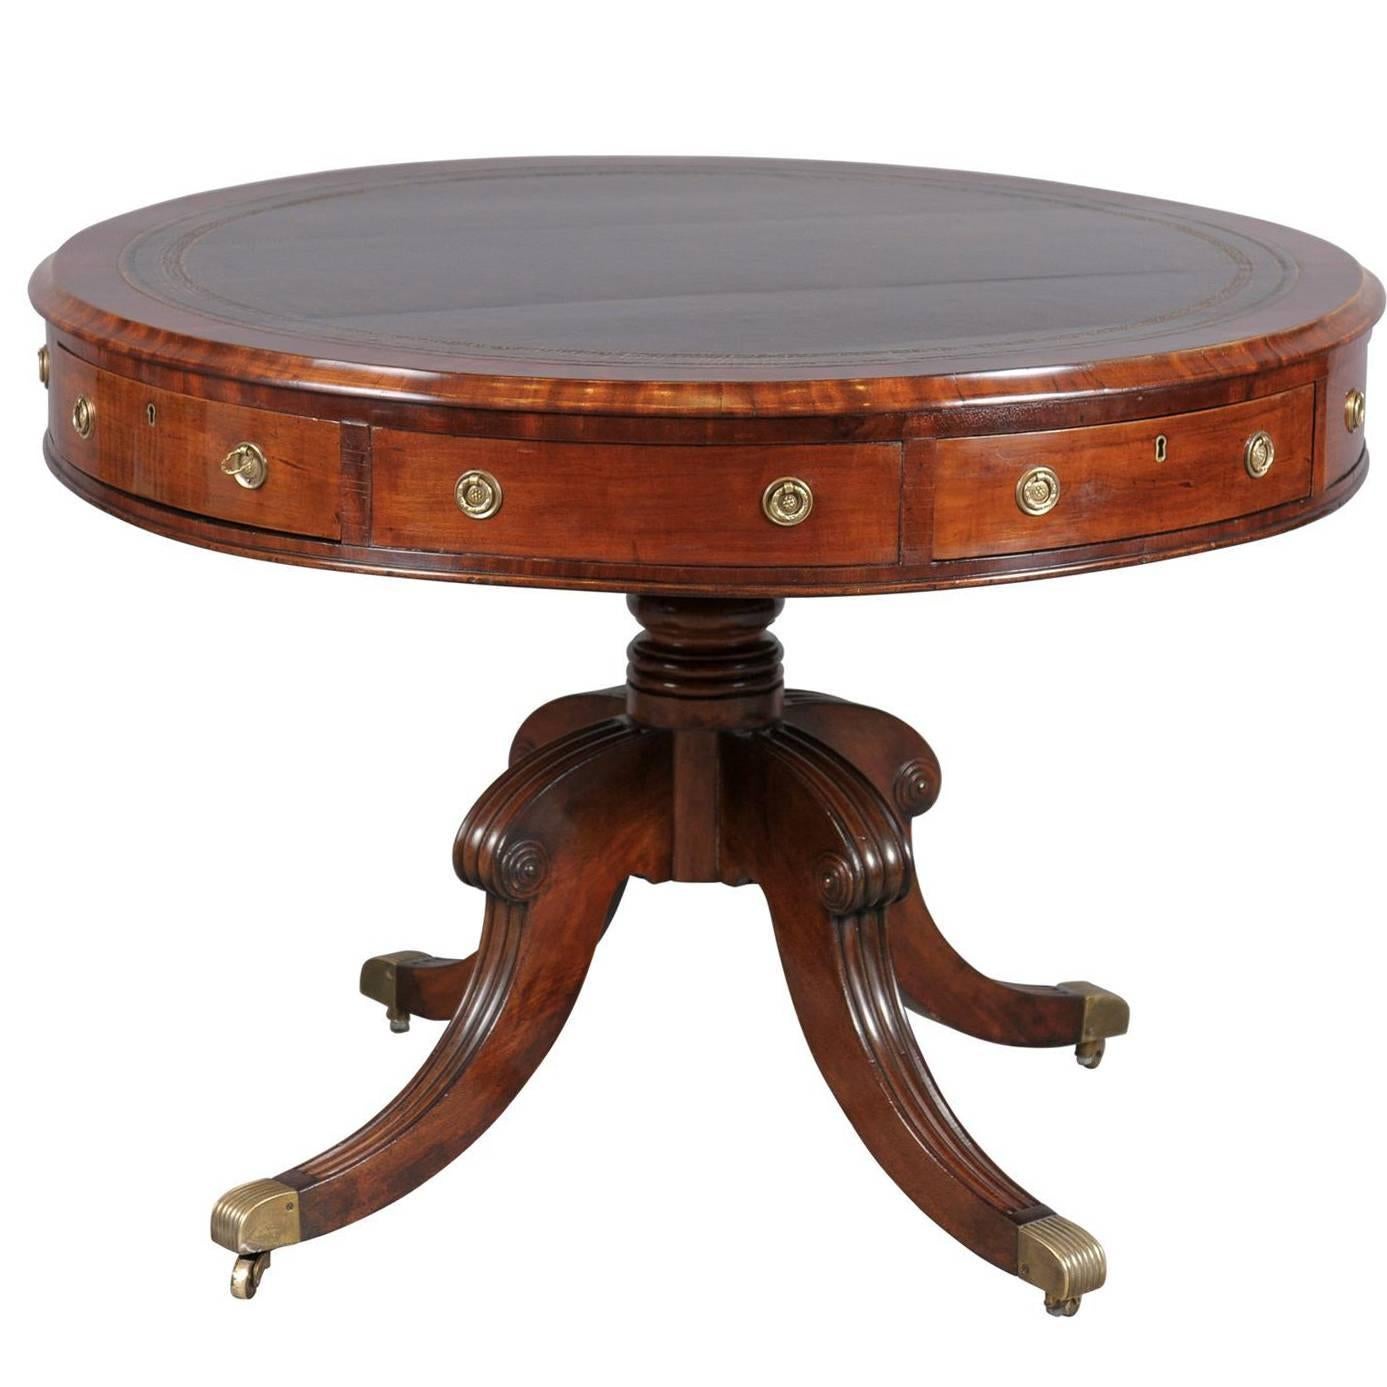 Early 19th Century English Mahogany Drum Table with Brown Leather Top